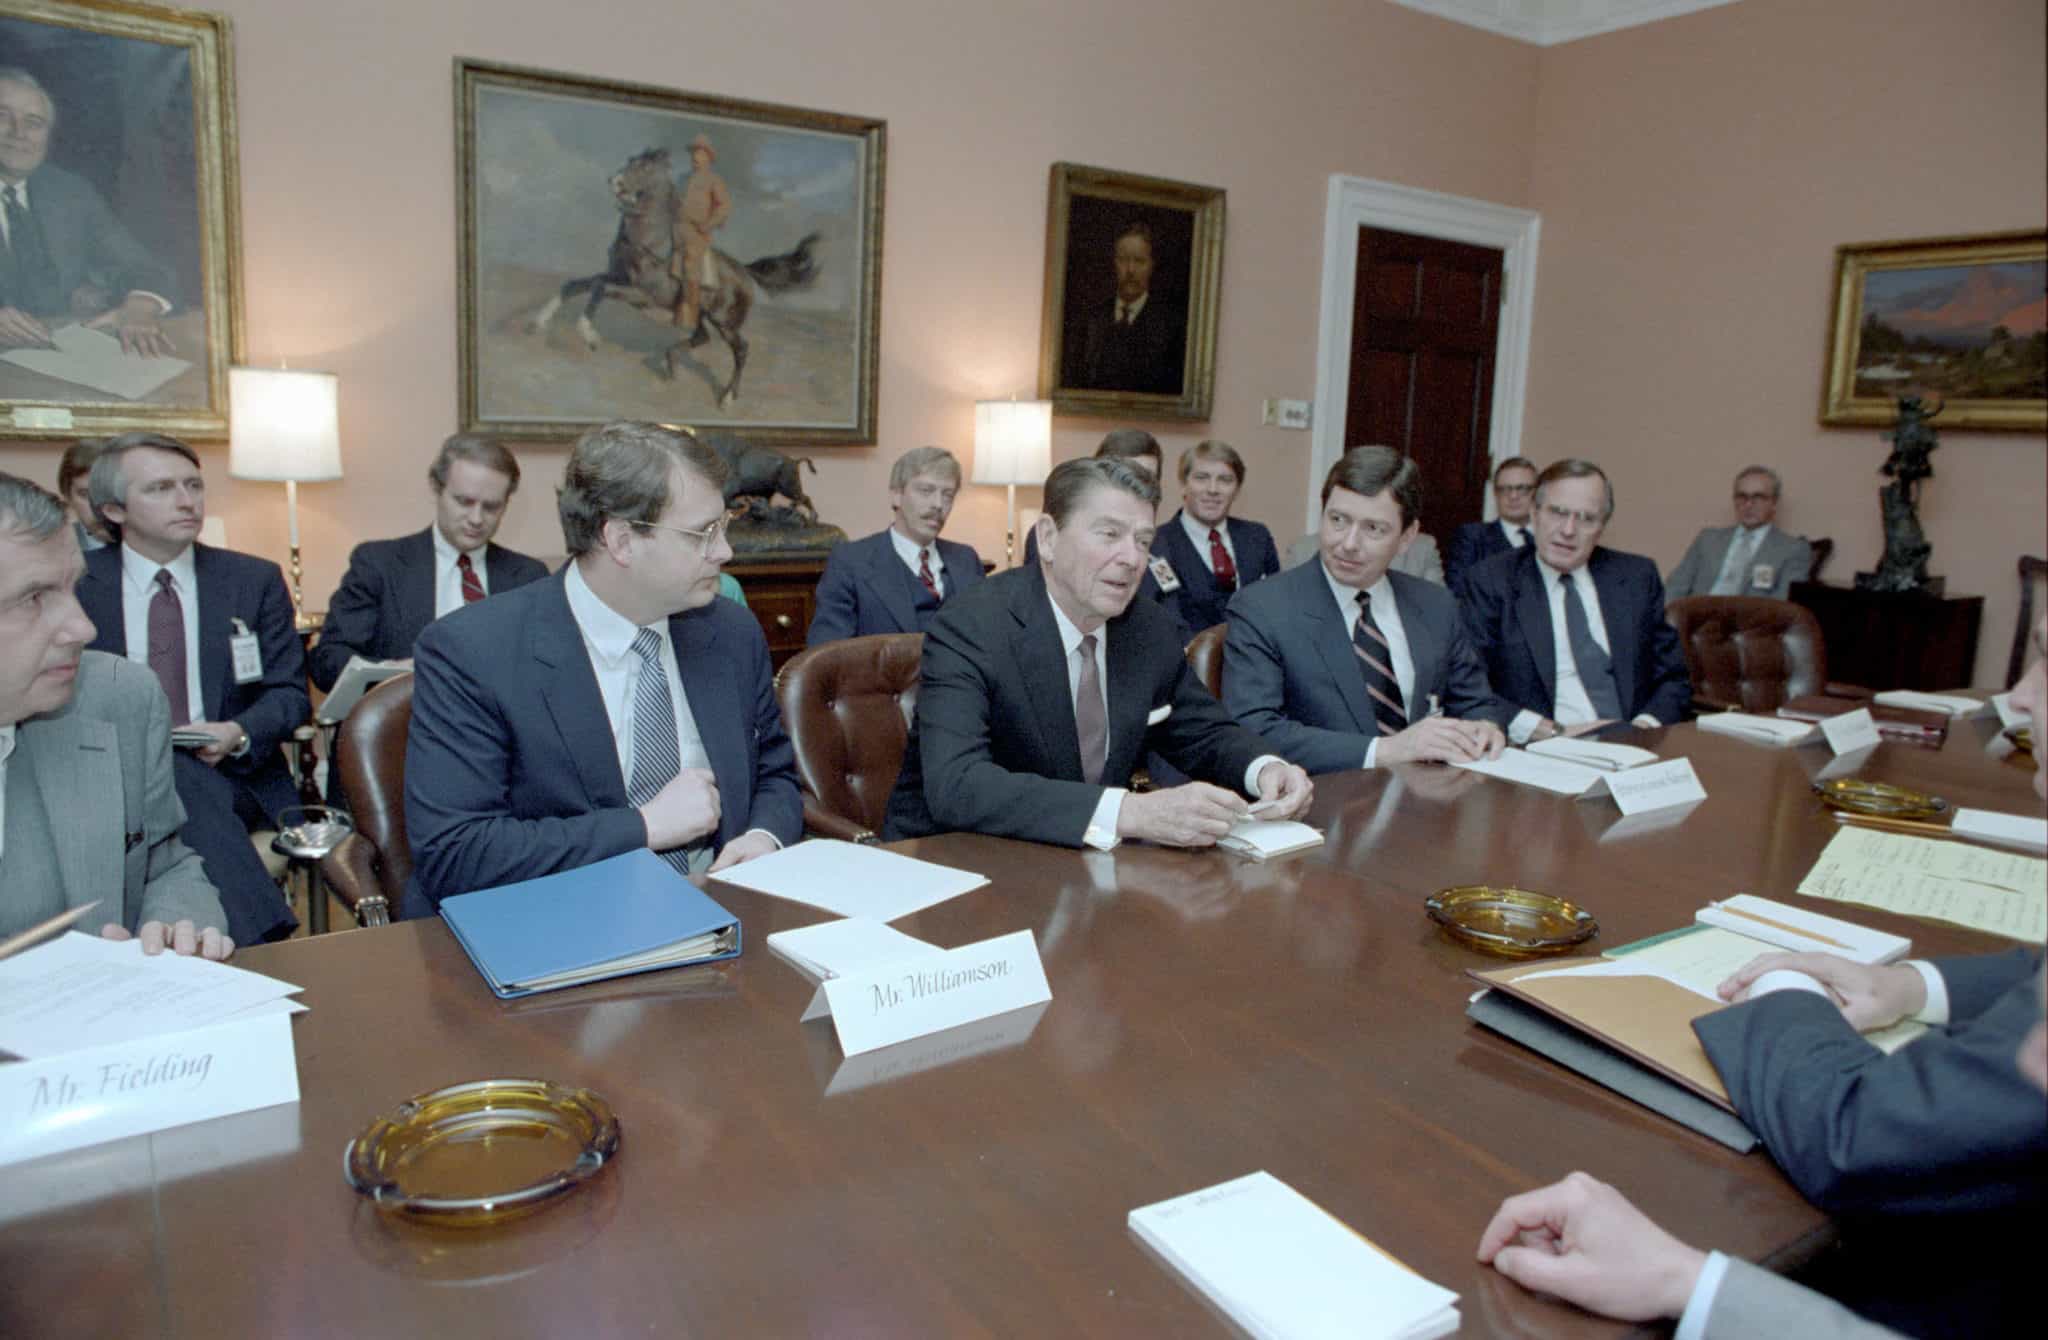 AGs with President Reagan